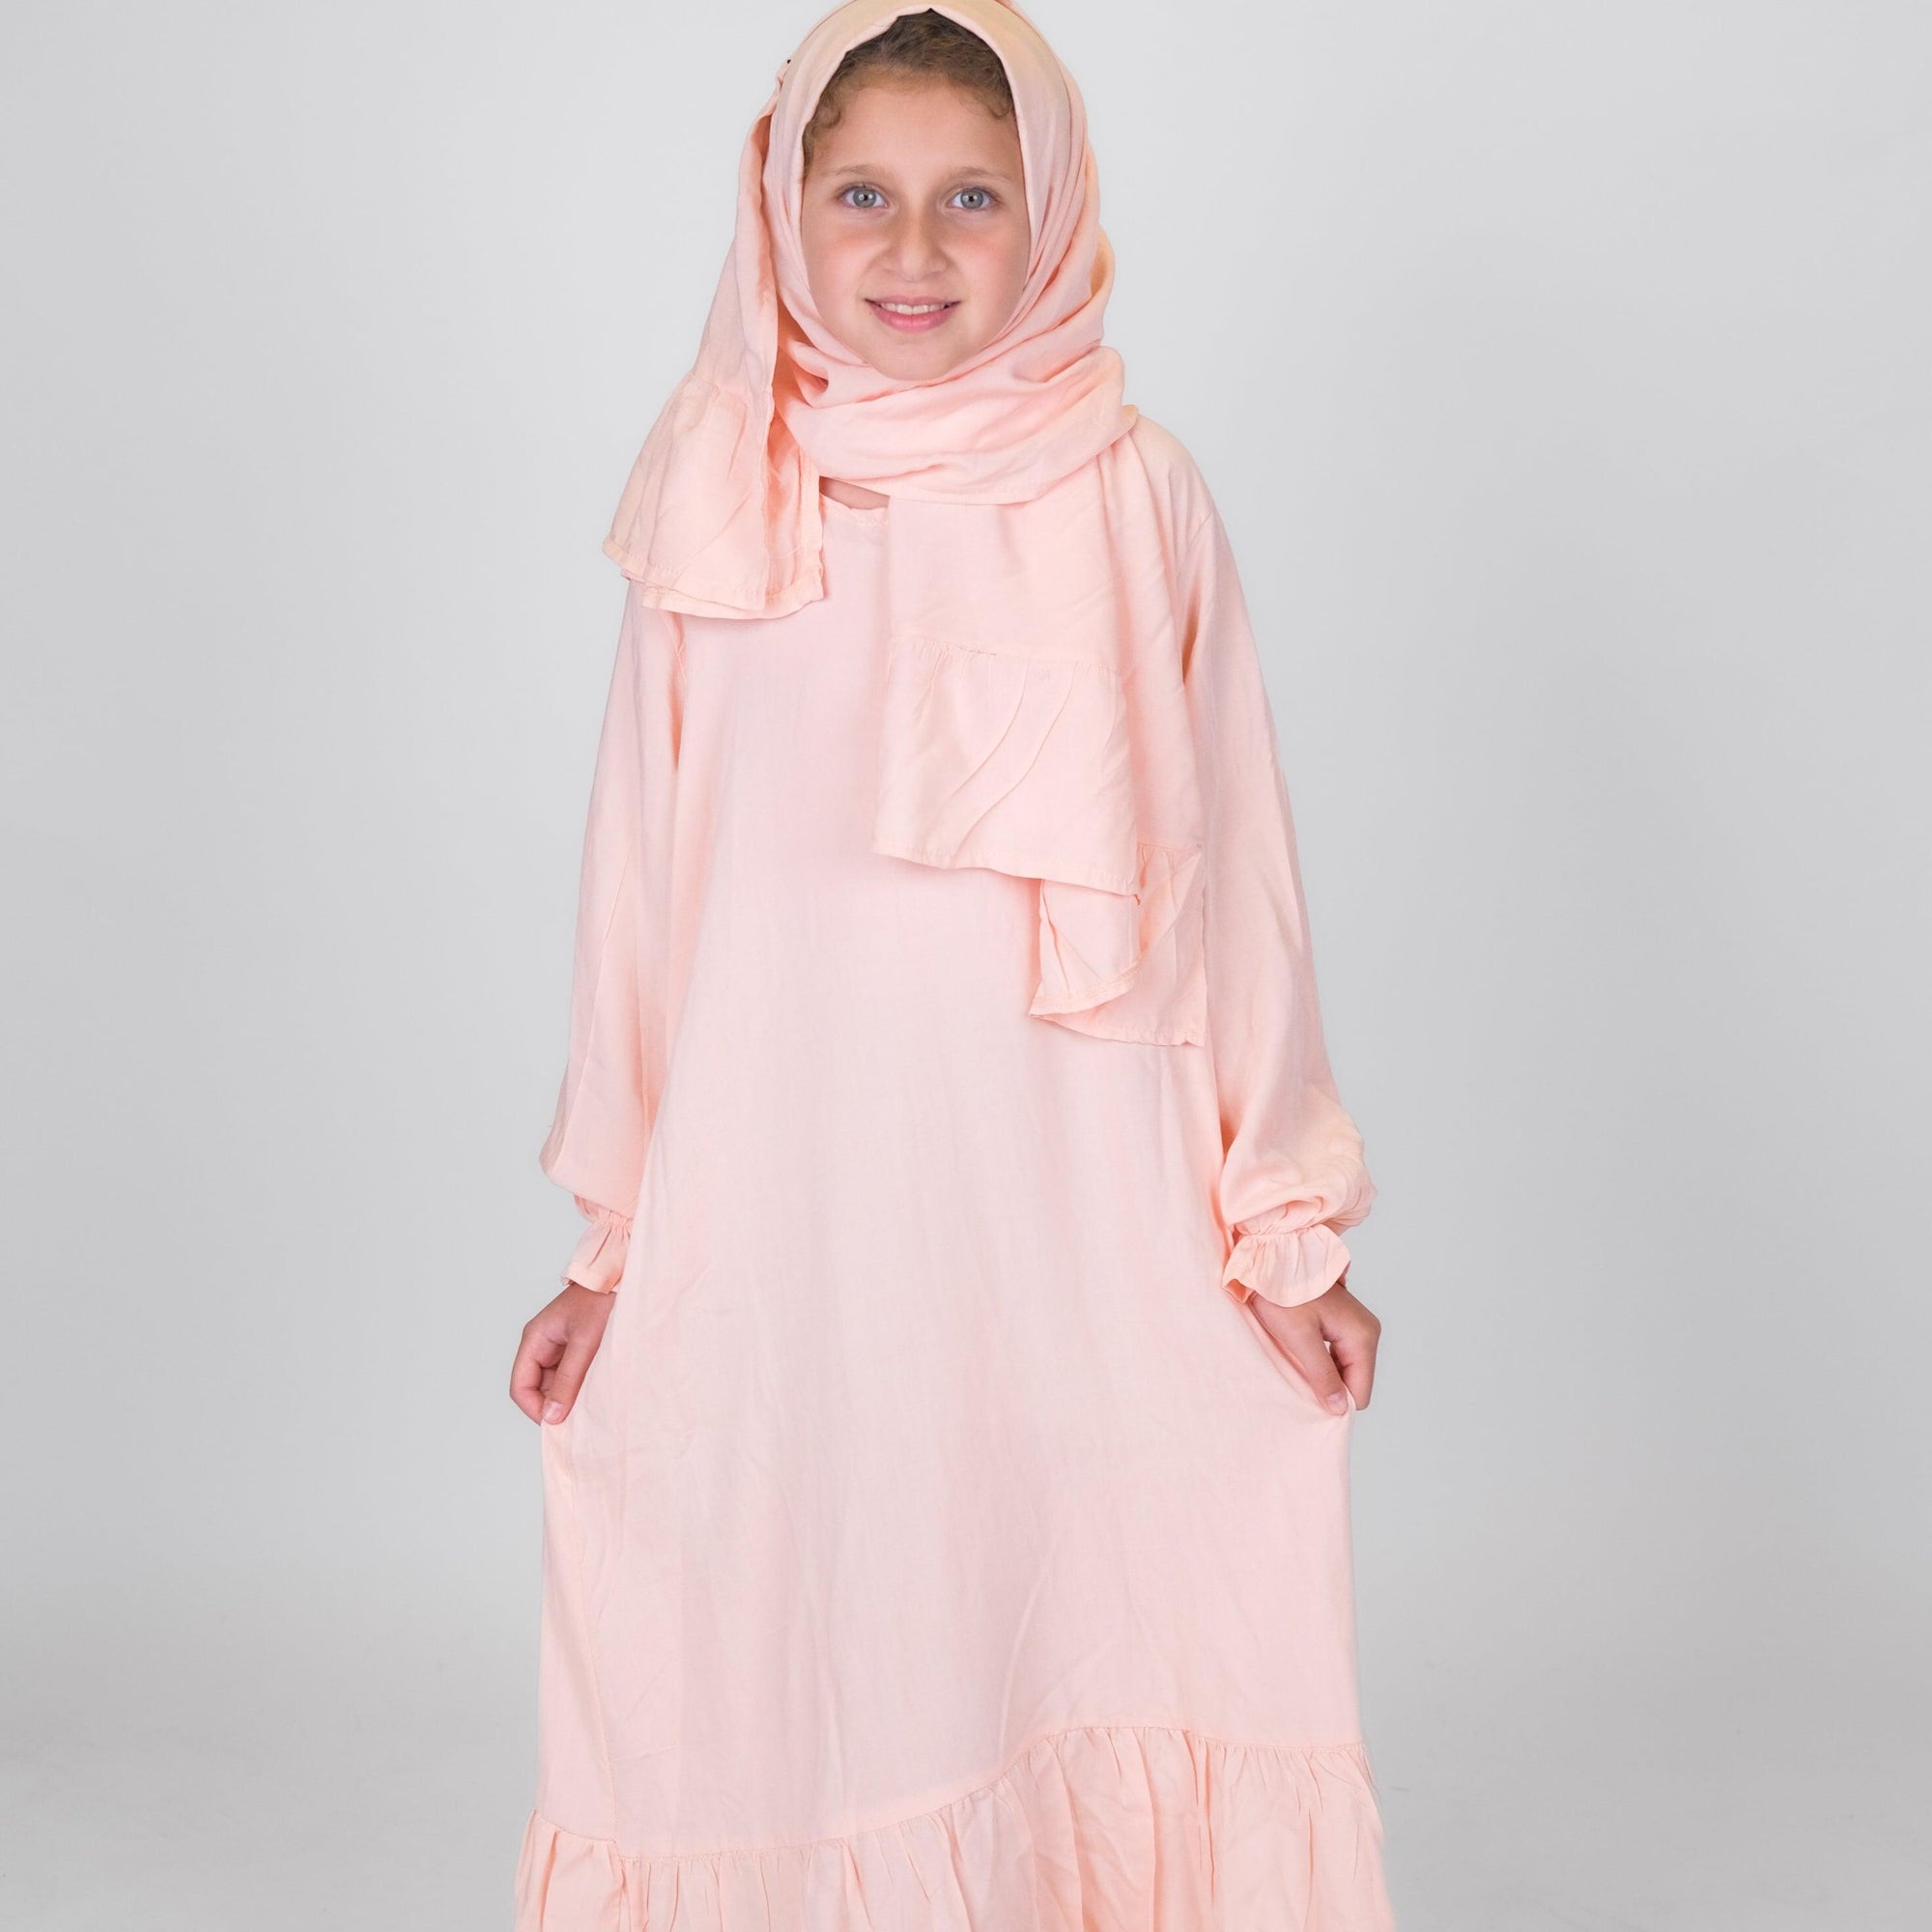 Praying Gown "Isdal" - Ourkids - Micmash